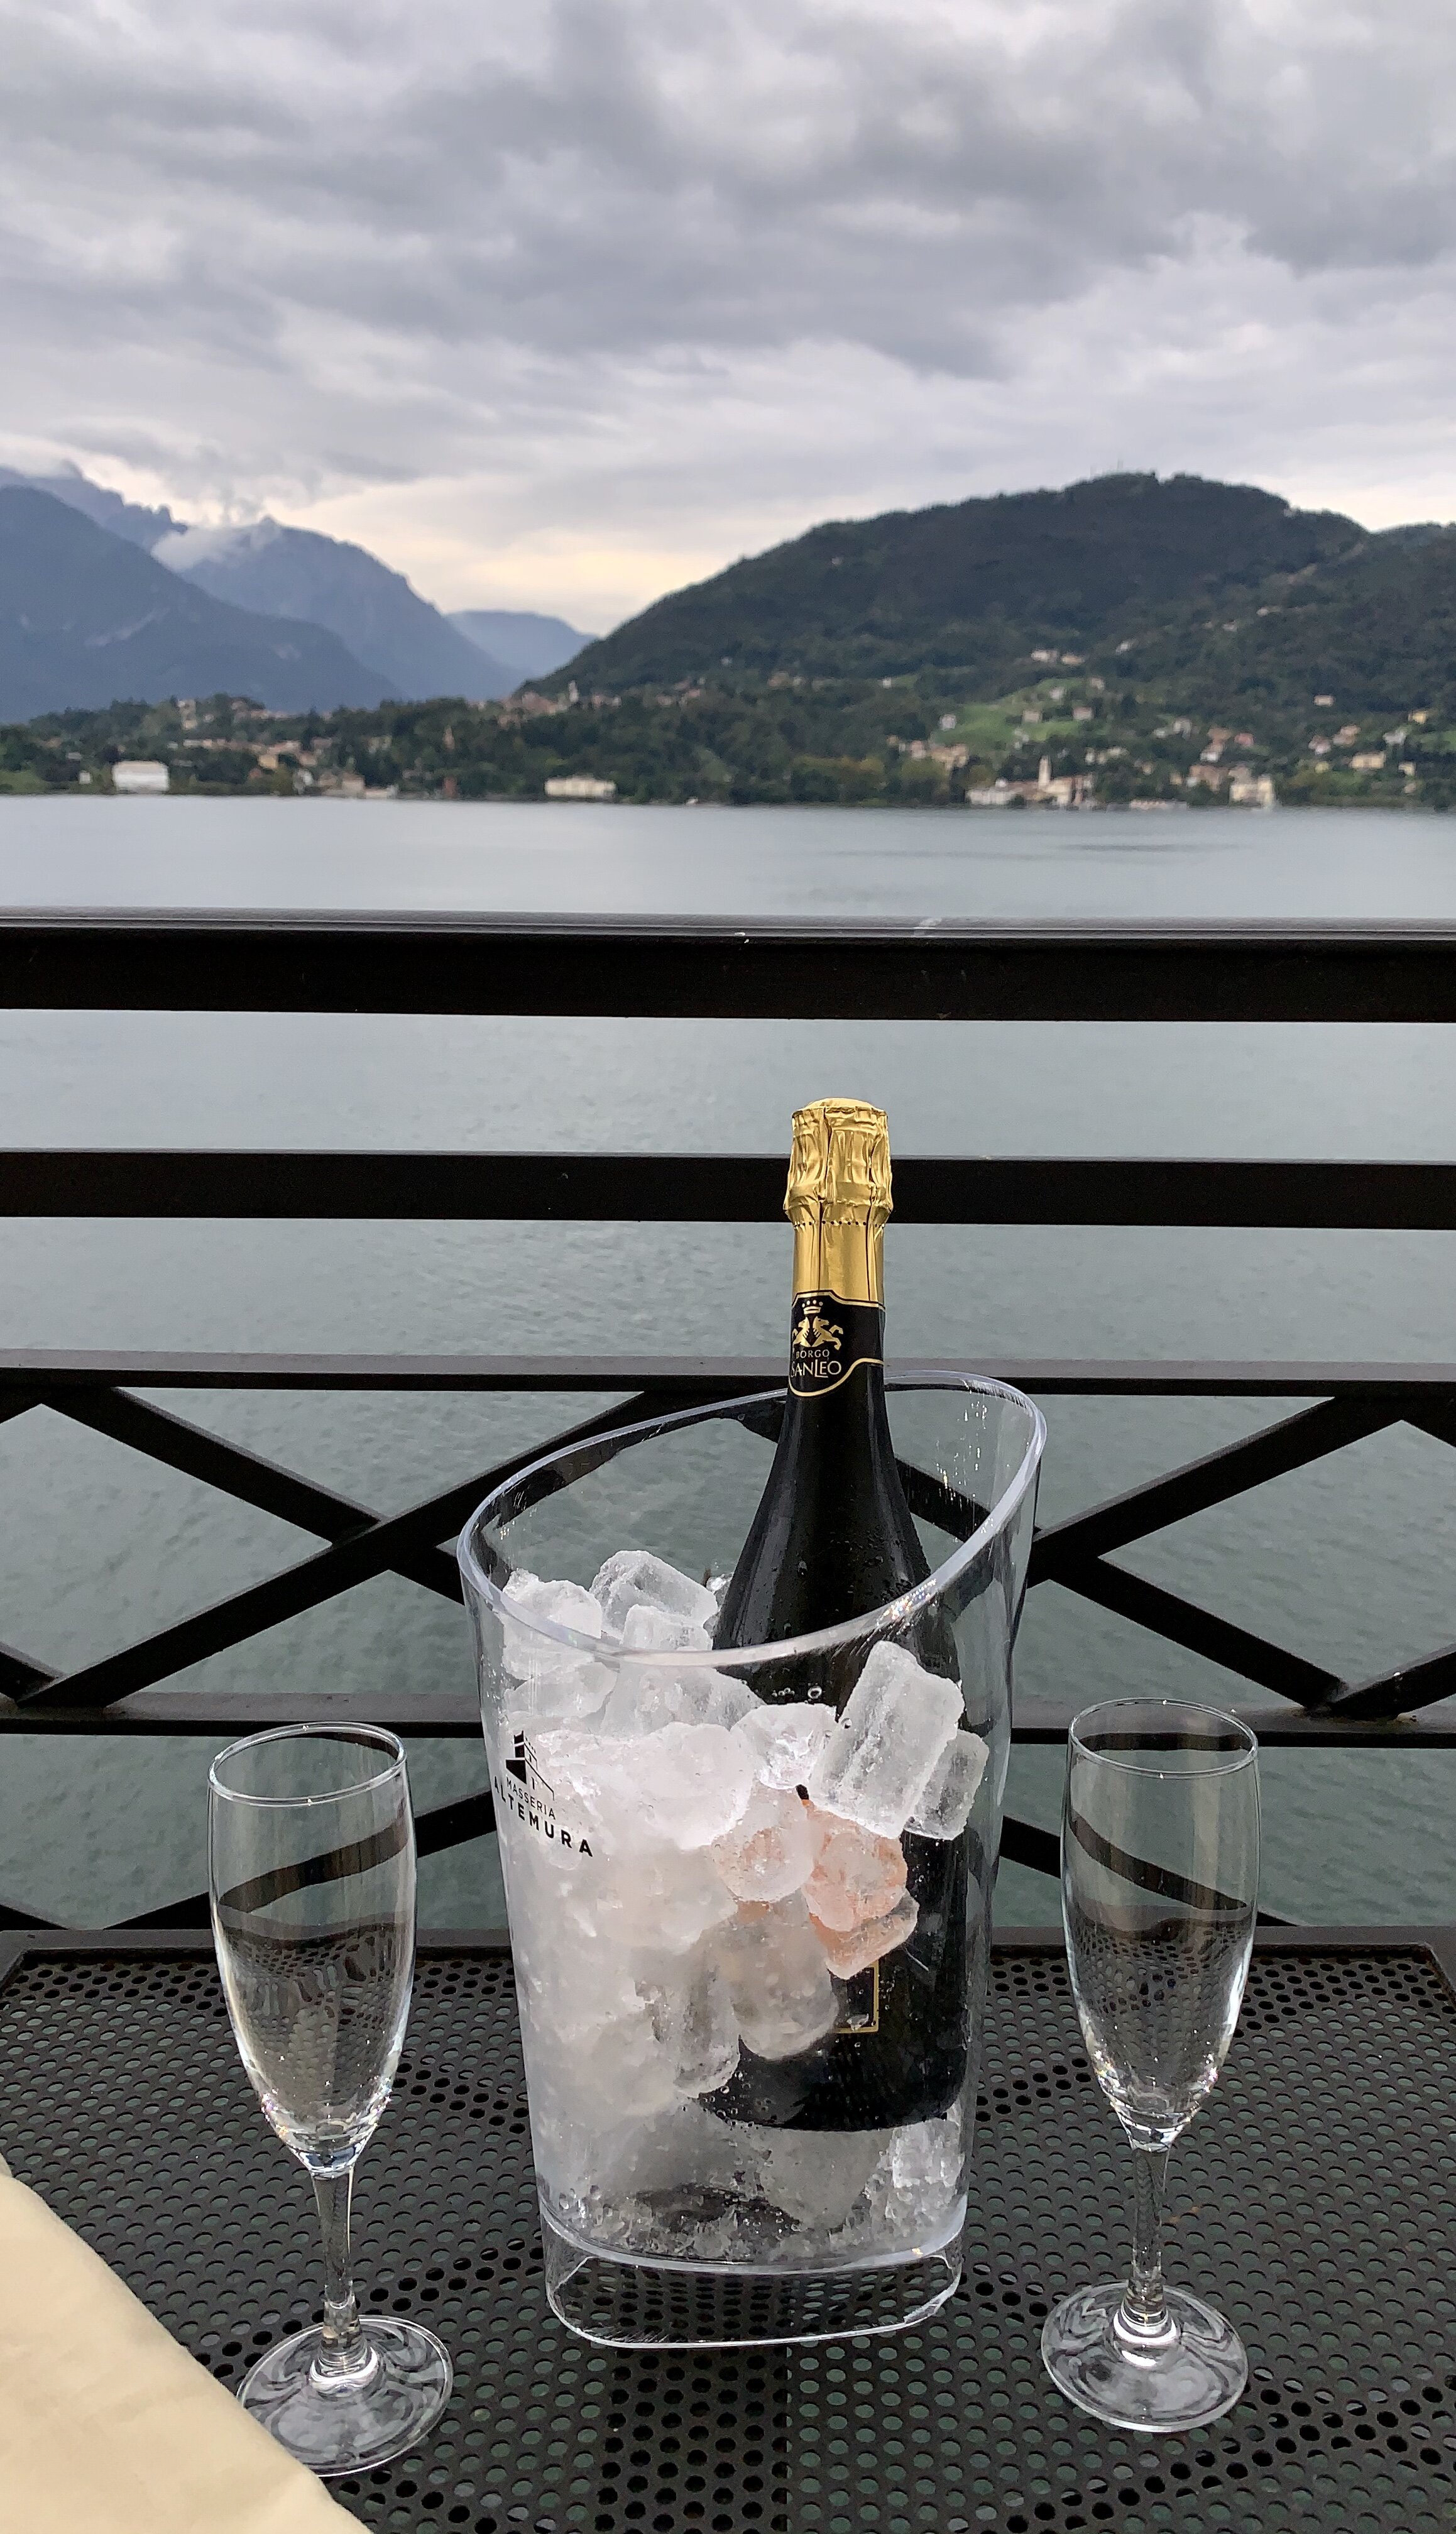 Prosecco with a view - the perfect way to celebrate our 30th anniversary